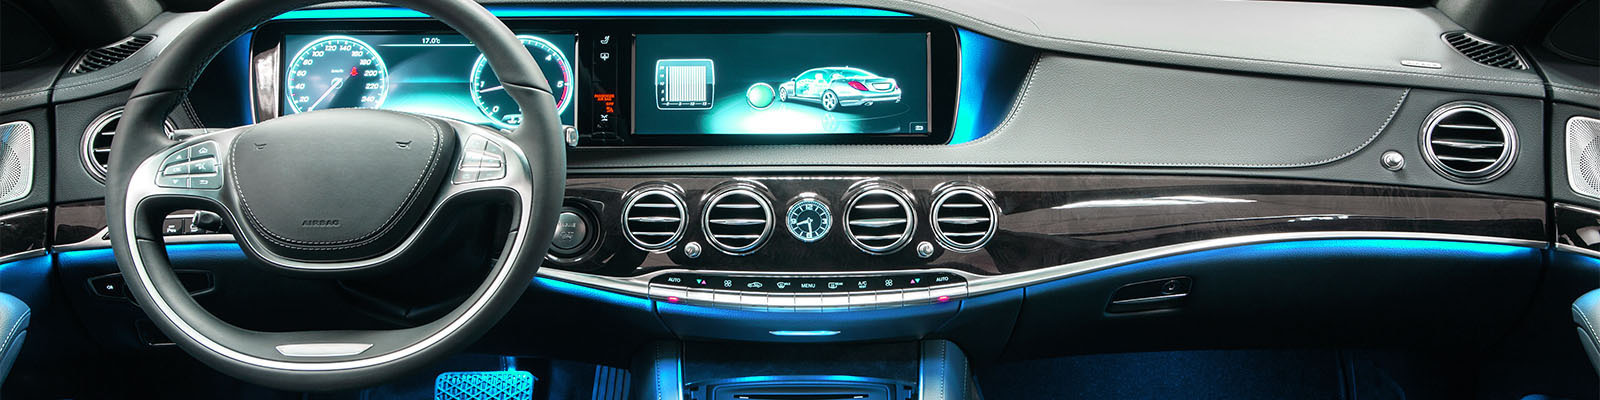 Car interior with LEDs